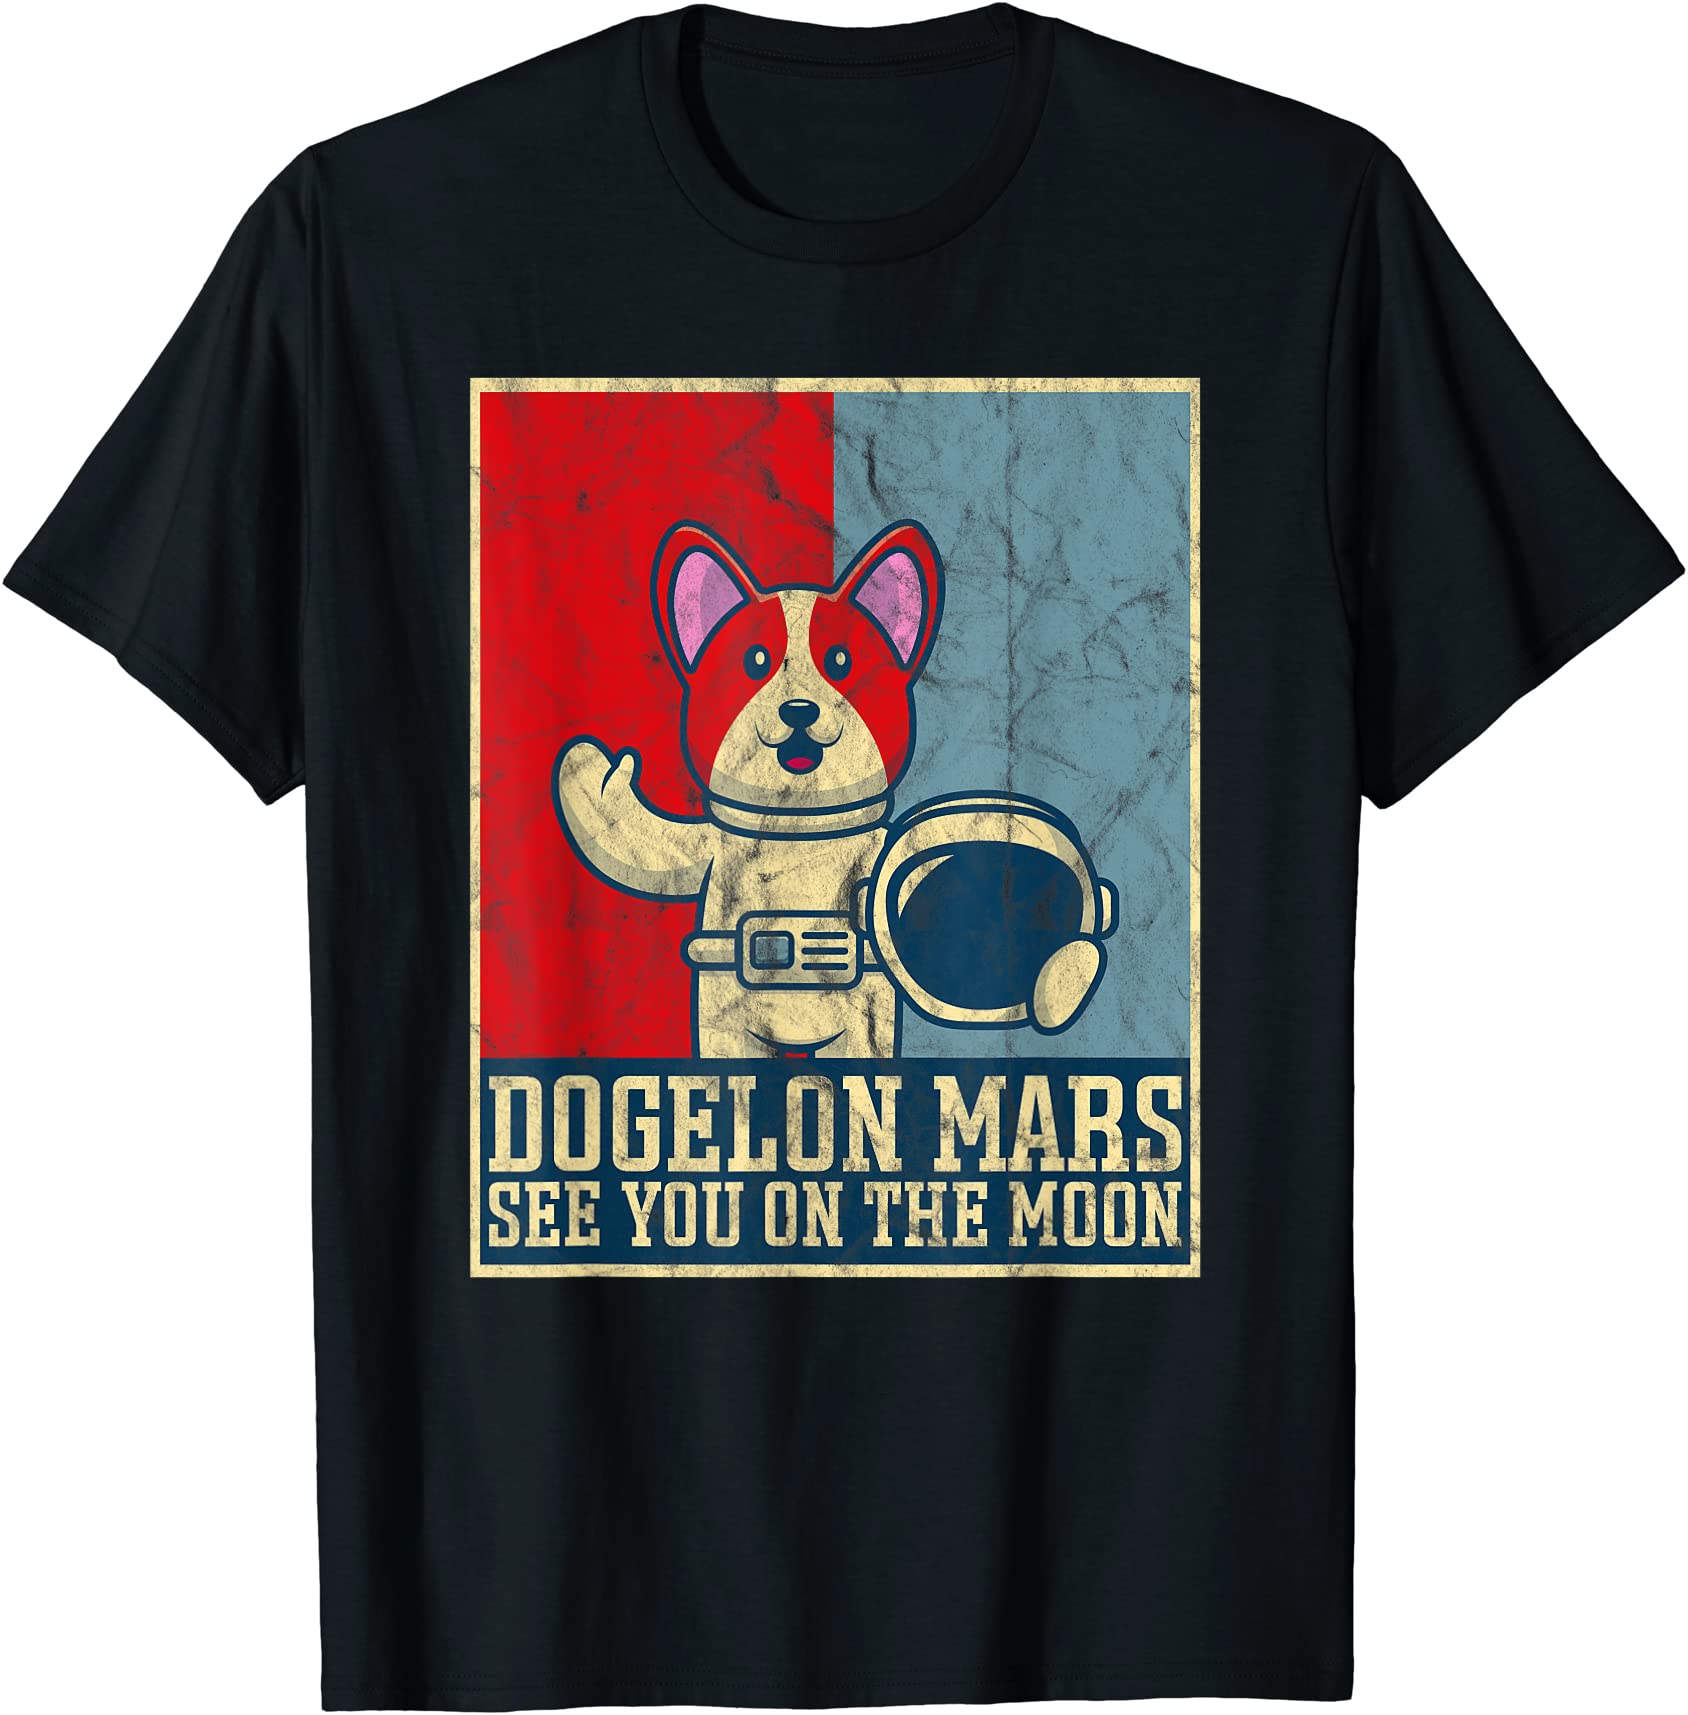 dogelon mars see you on the moon astronaut crypto t shirt men - Buy t ...